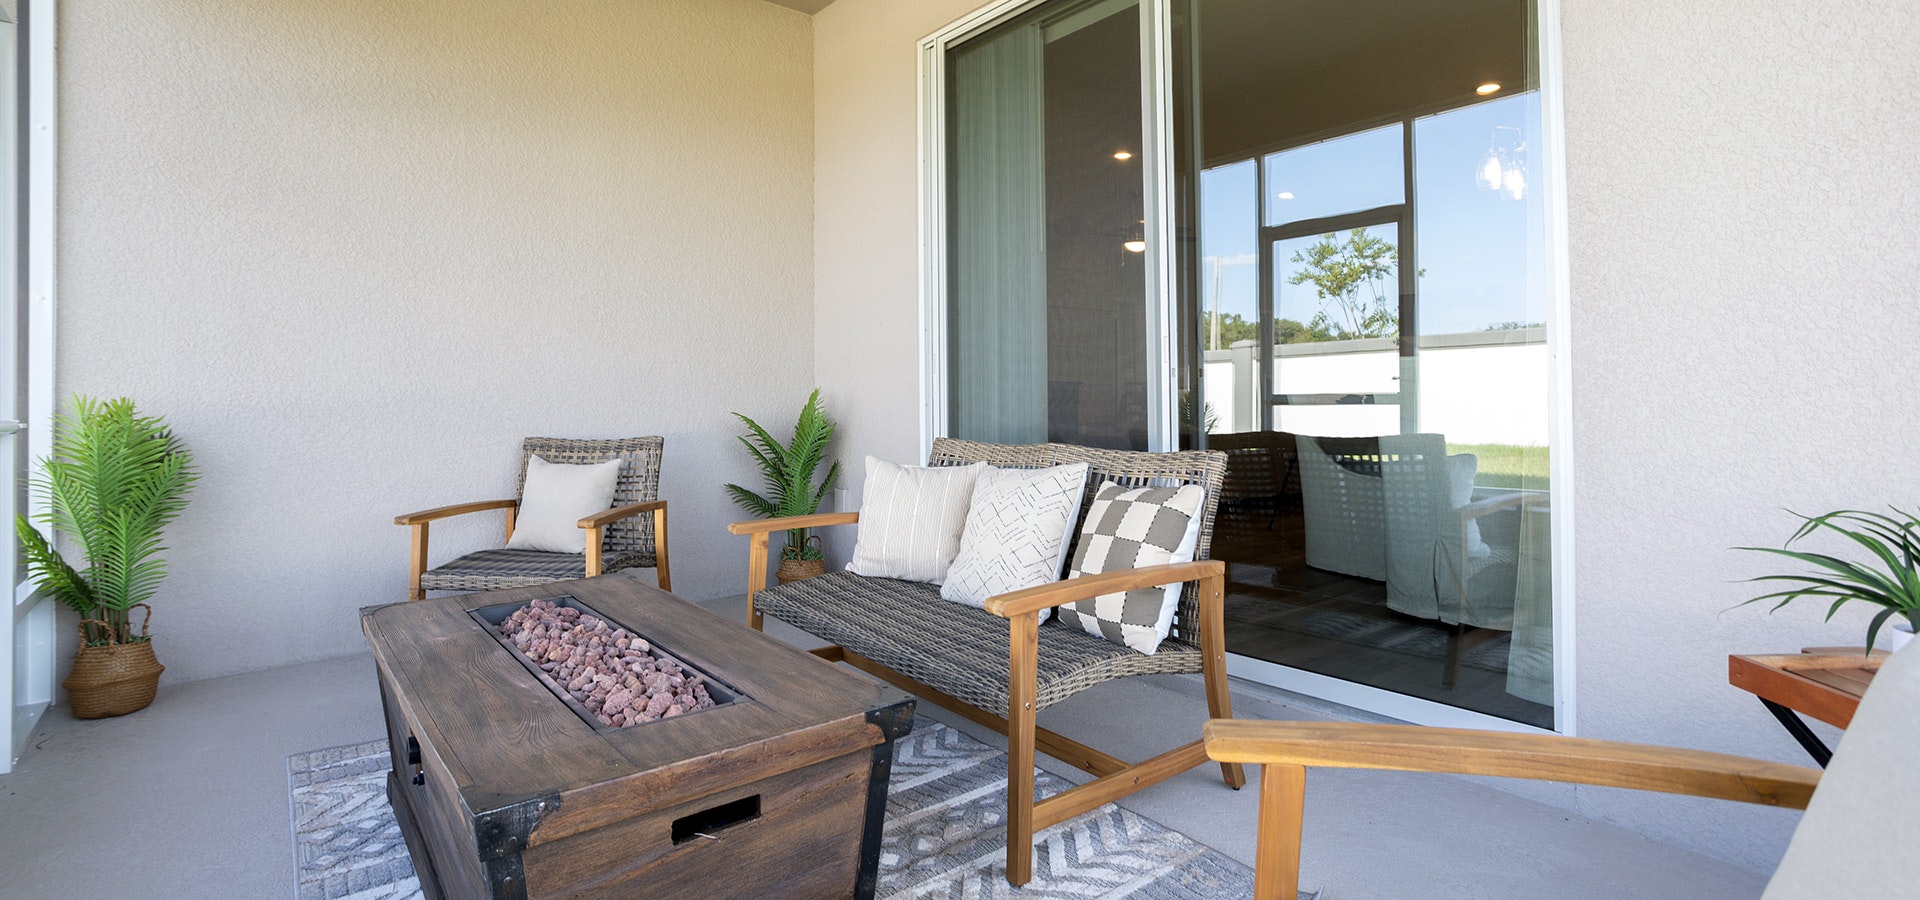 This Auburndale new home includes outdoor living space, a feature highly desired by Florida homebuyers.